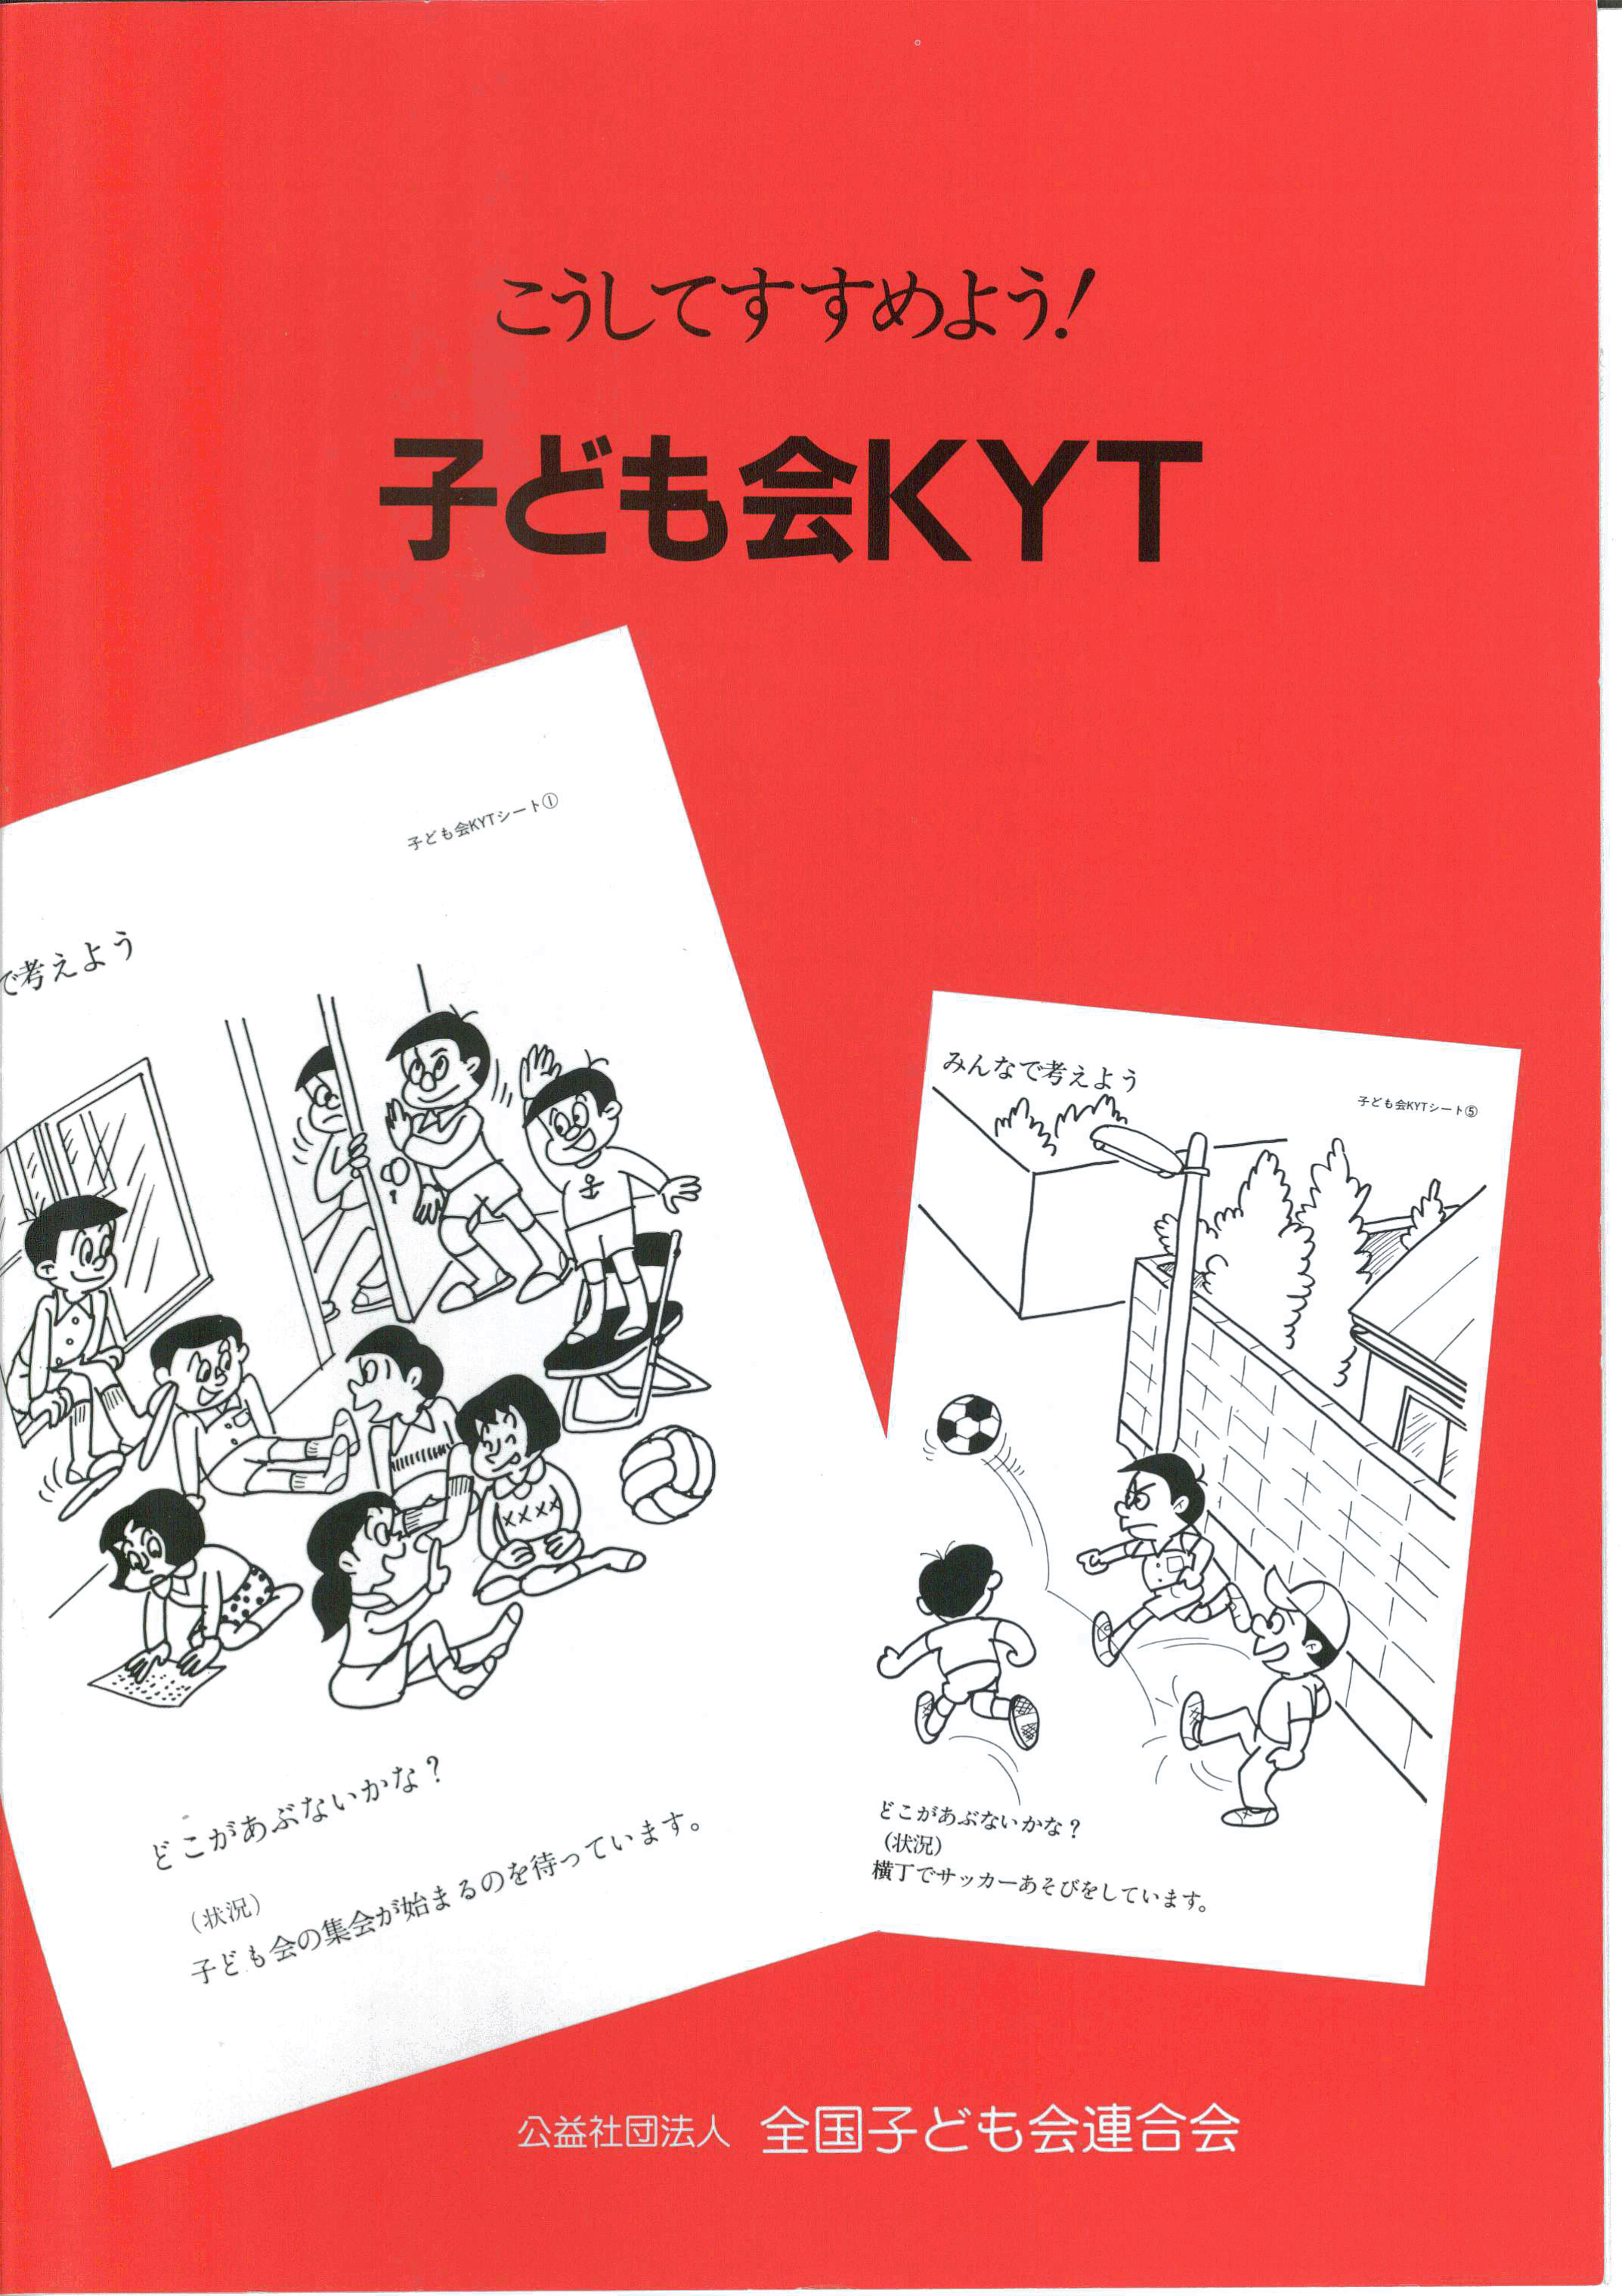 Images Of 危険予知訓練 Japaneseclass Jp